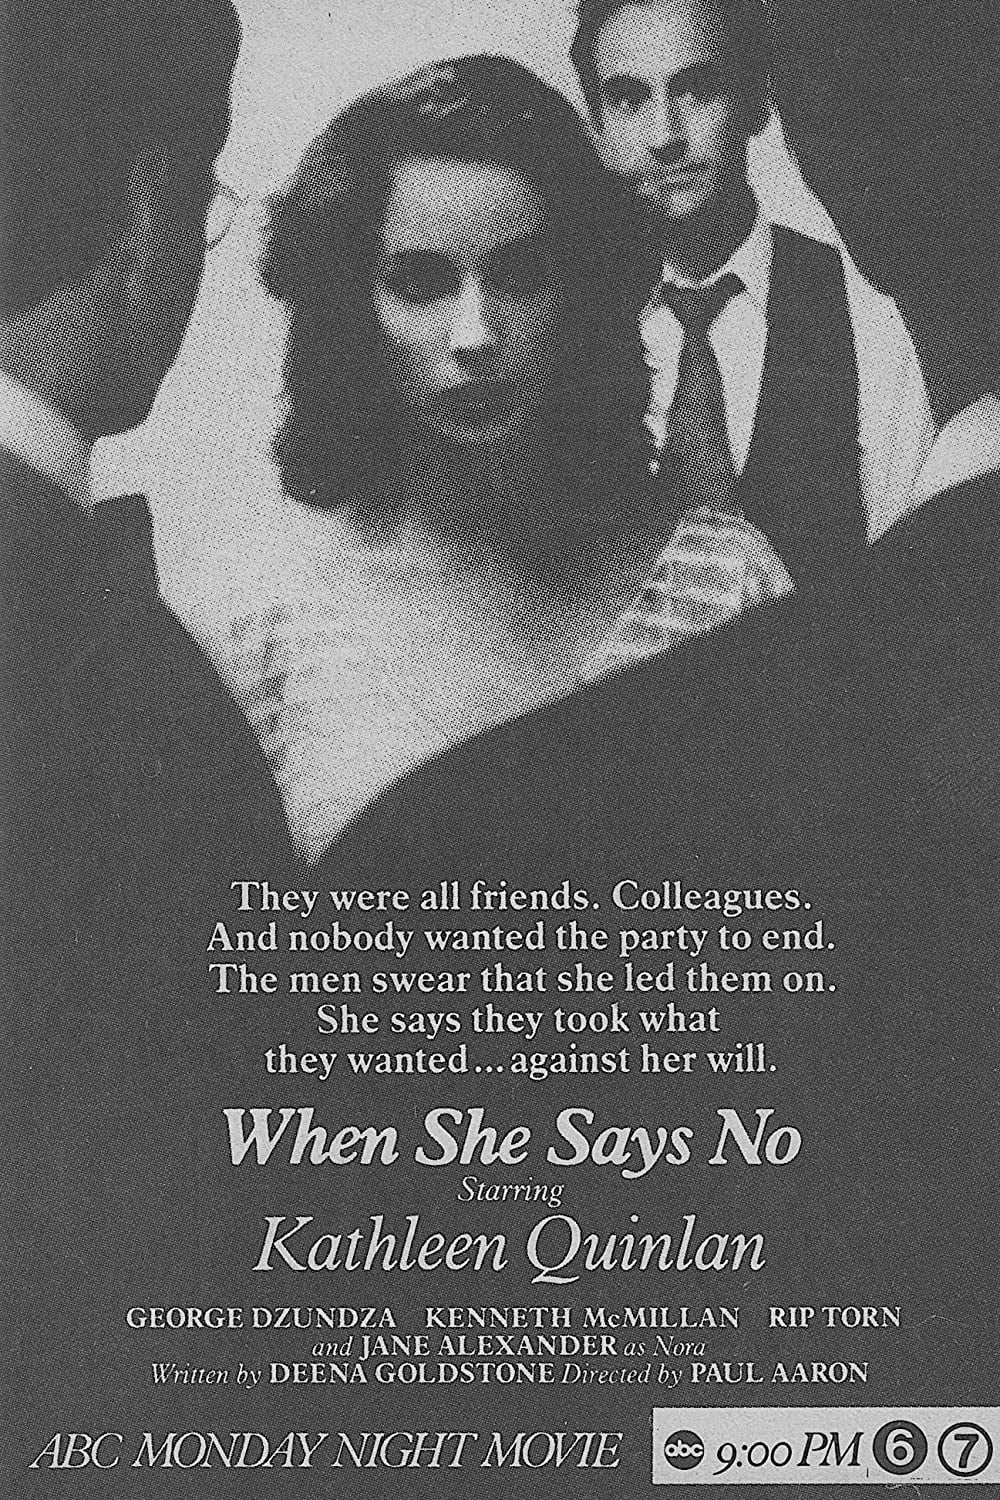 When She Says No (1984)